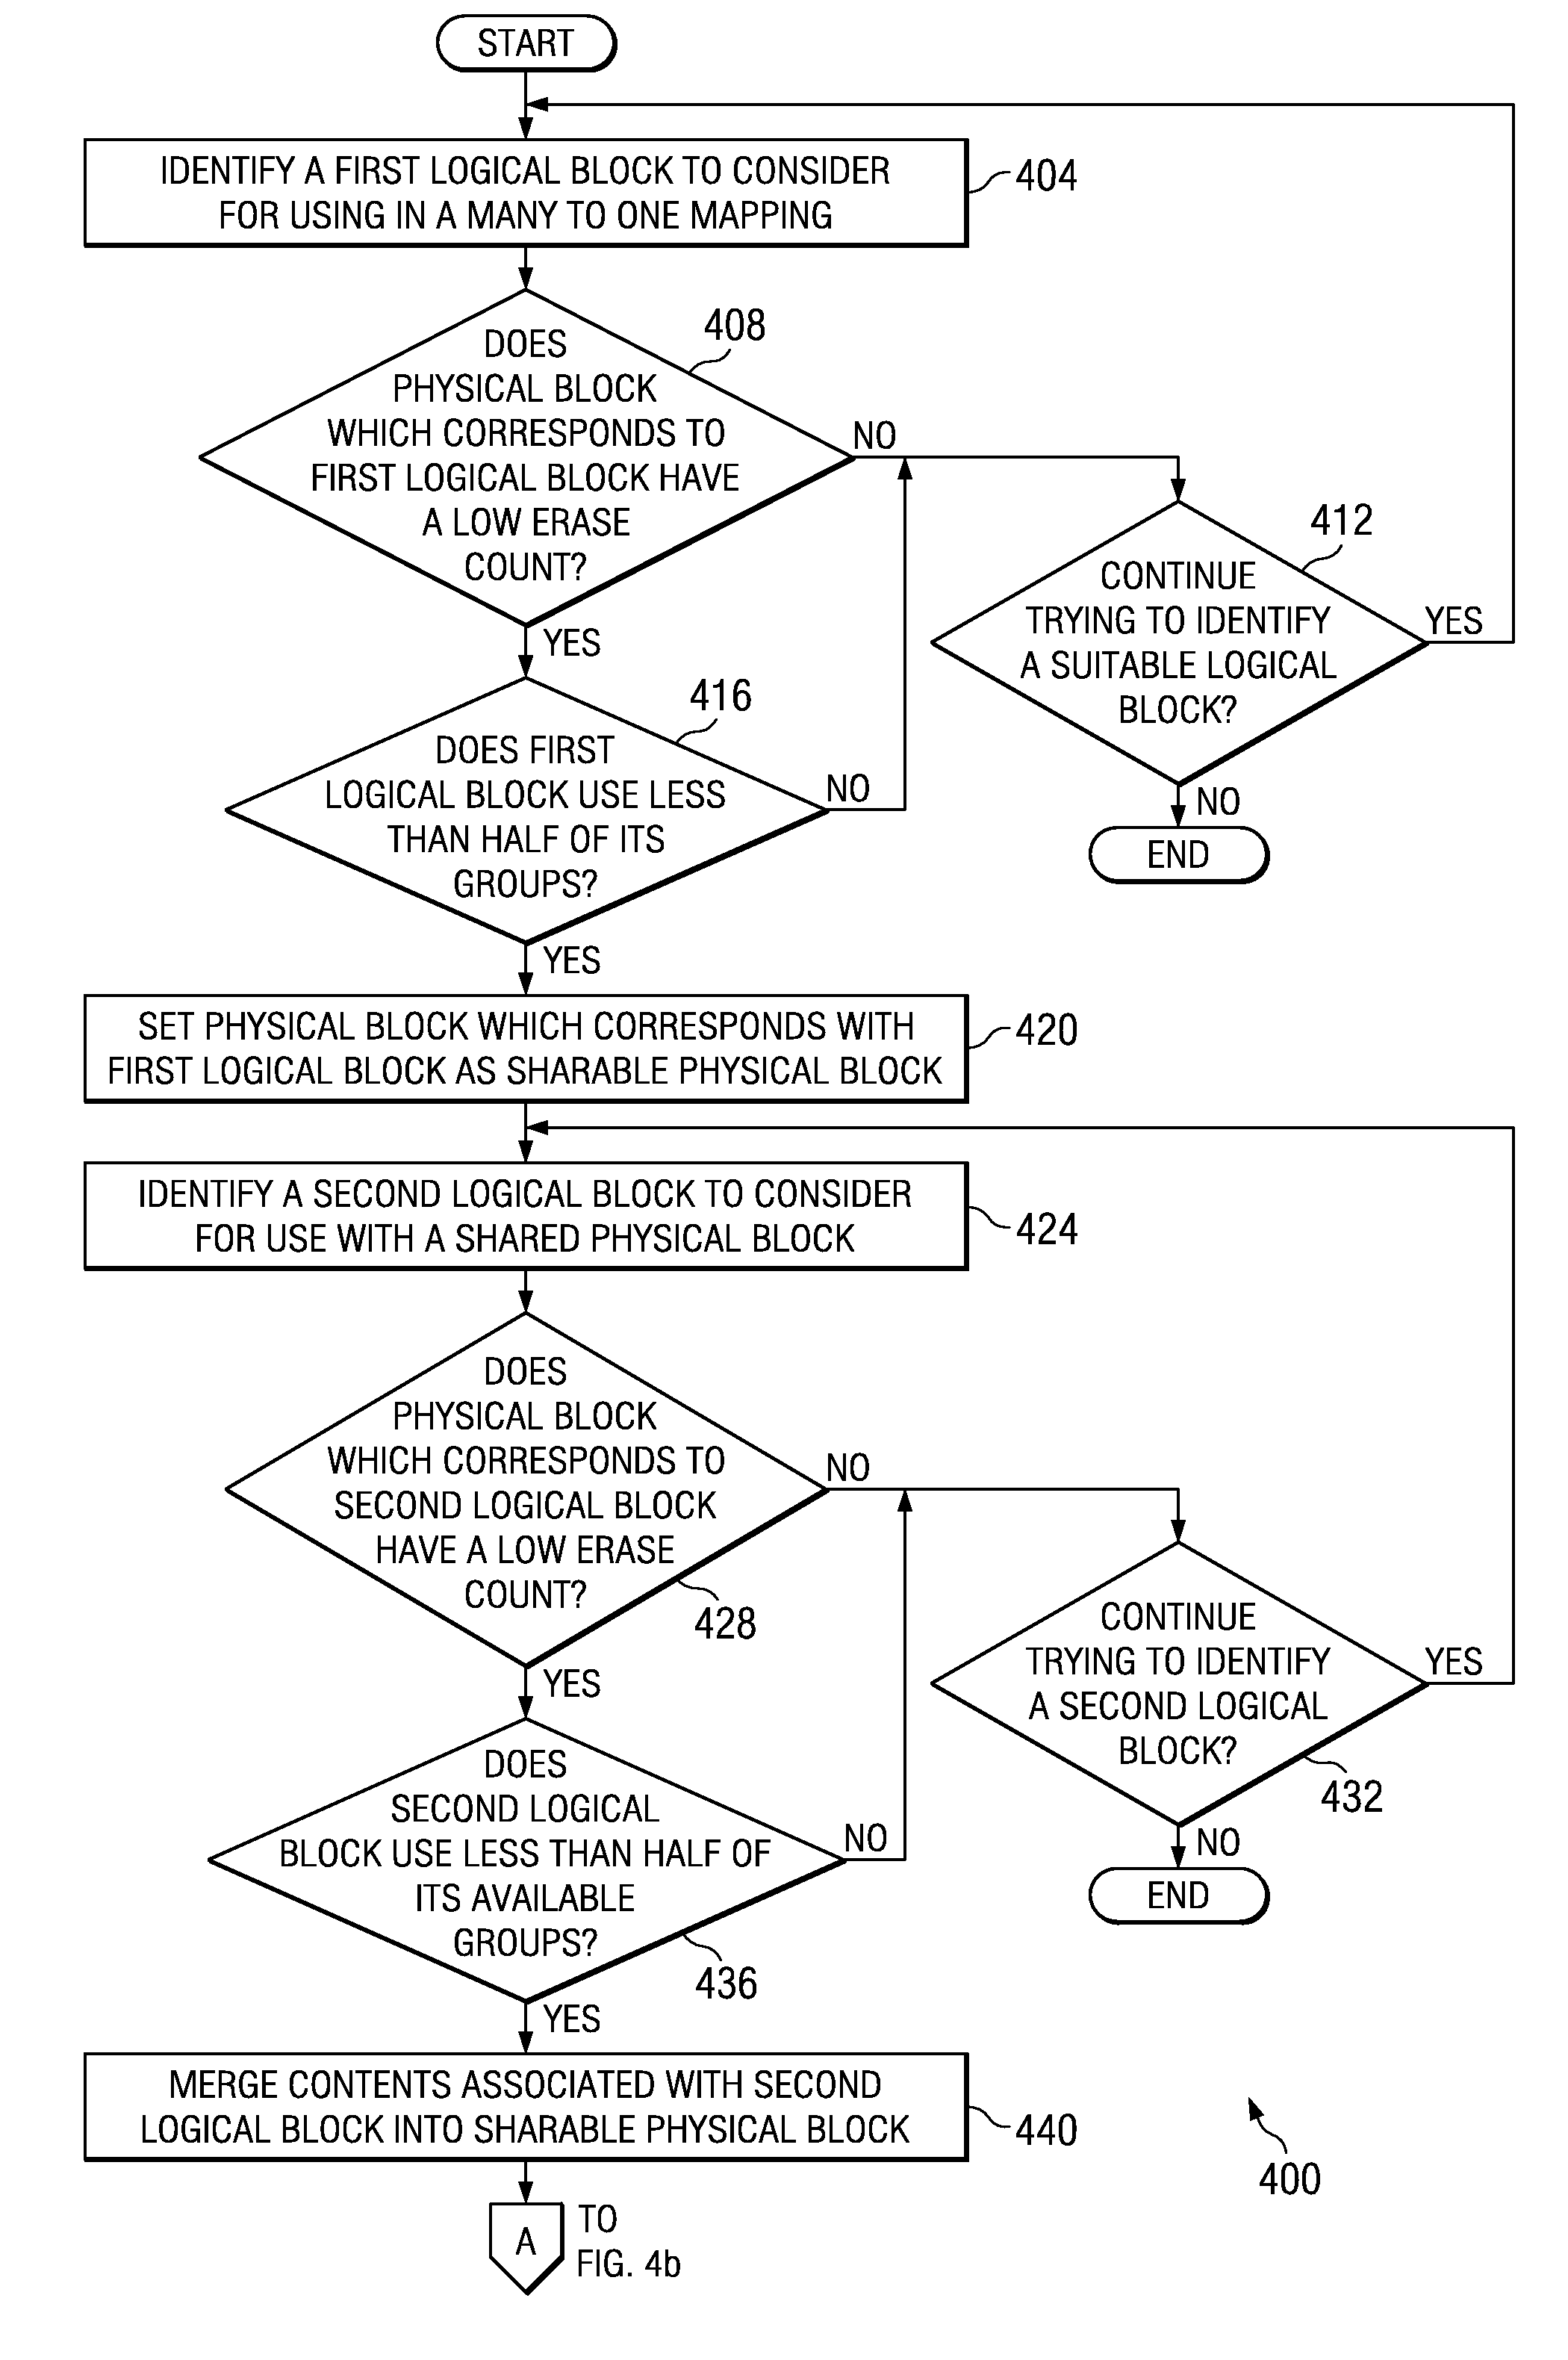 Hybrid Mapping Implementation Within a Non-Volatile Memory System